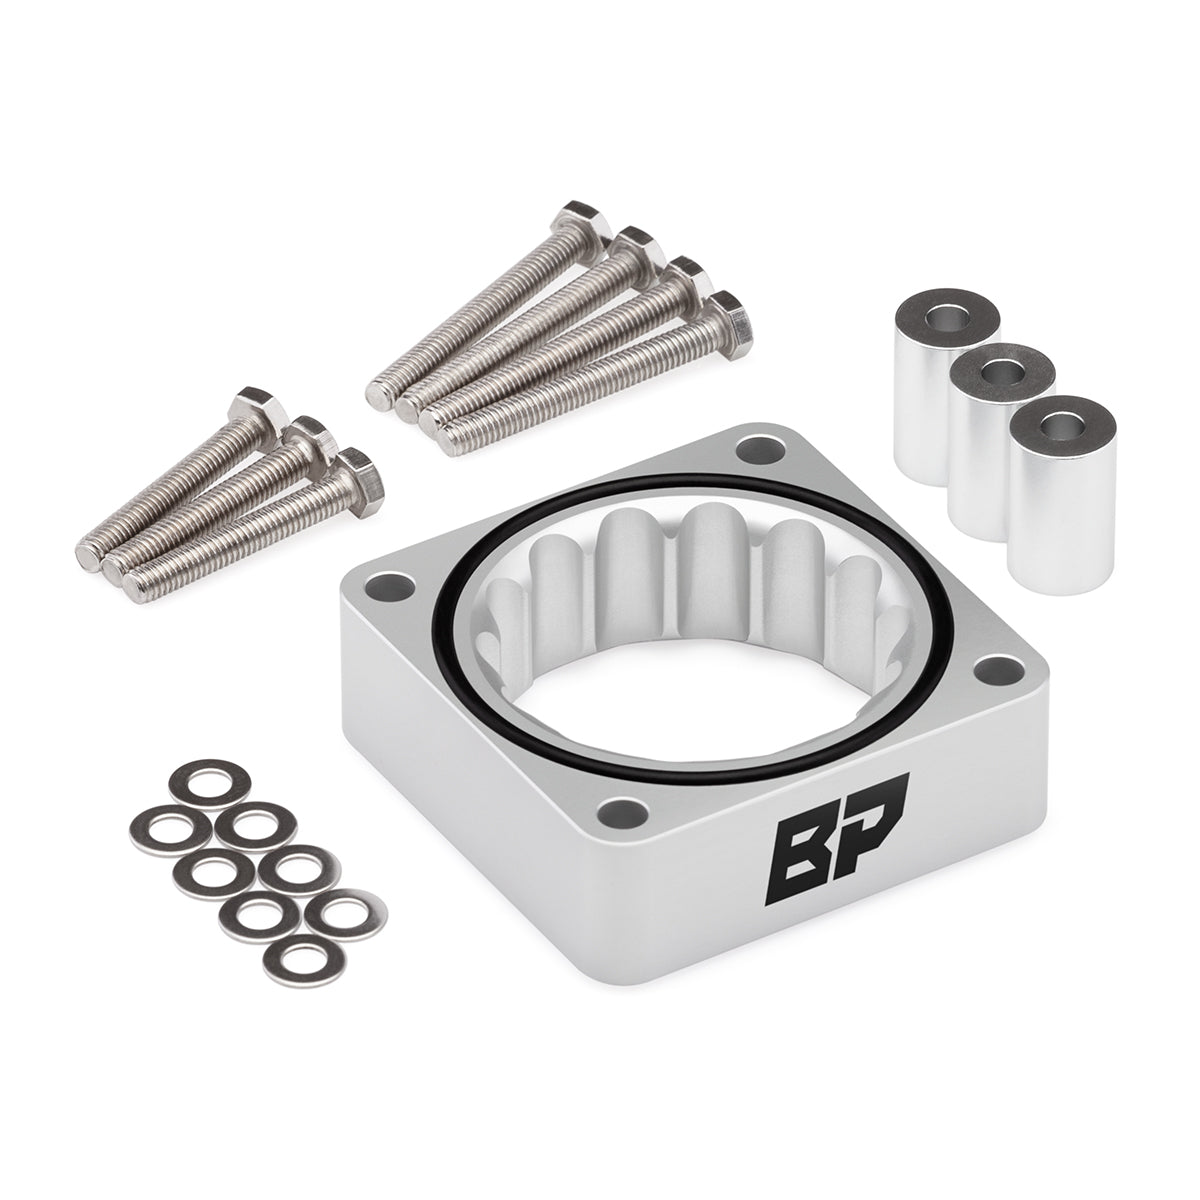 1991-1995 Jeep Wrangler YJ 2.5L and 4.0L Flat Throttle Body Spacer-Throttle Body Spacer-Blackpathinc